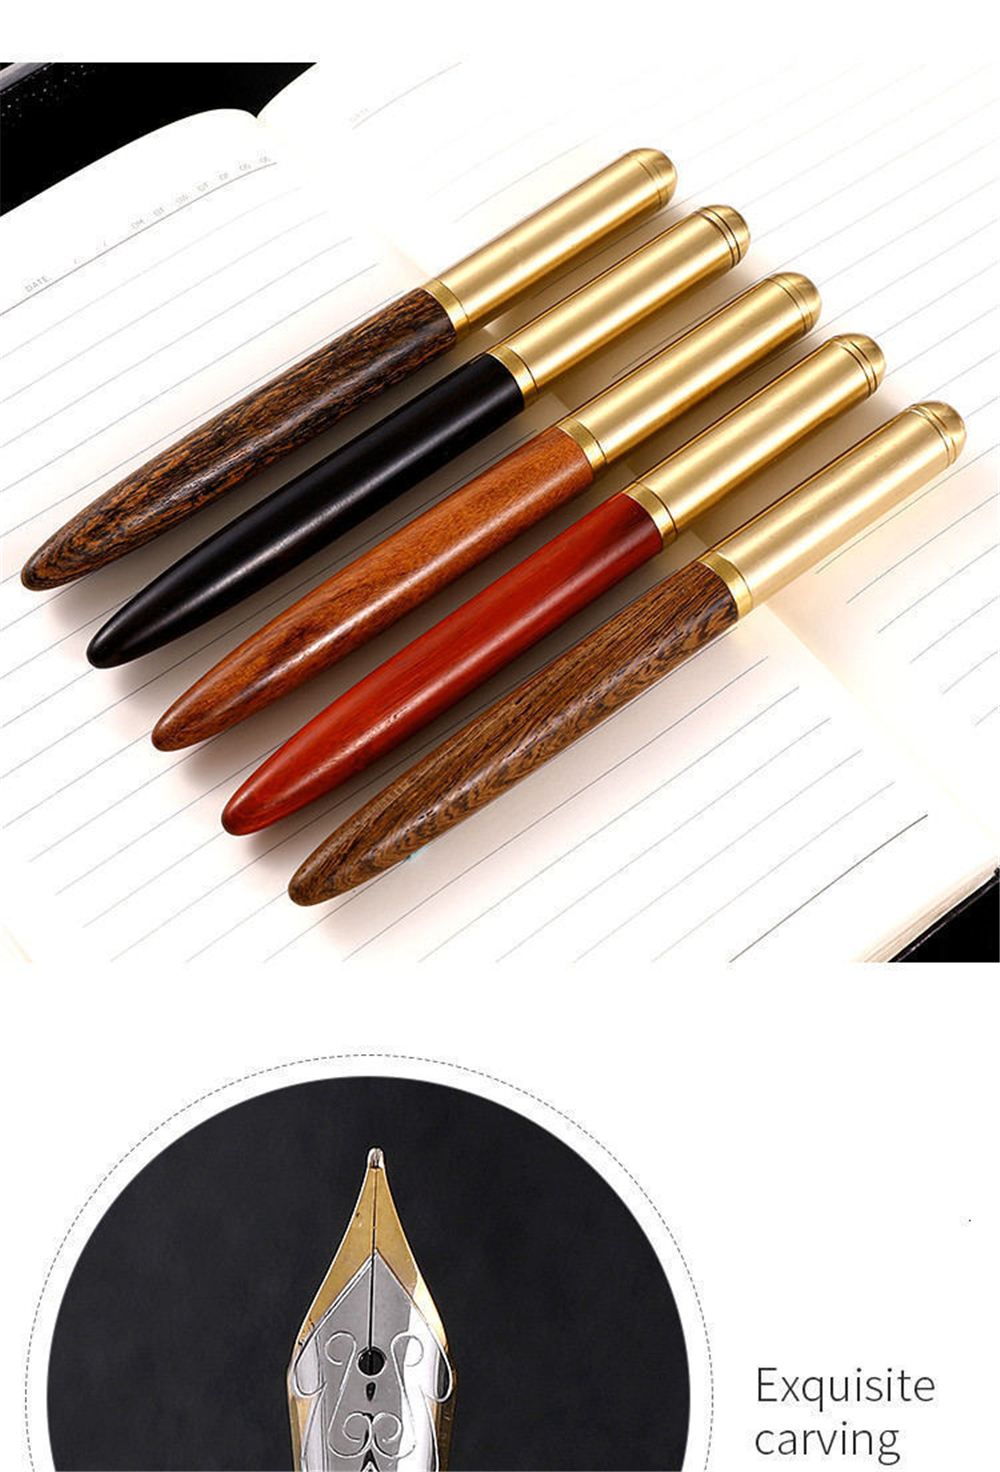 0.7mm Nib Wood Fountain Pen Ink Classic Metal Wood Pen Calligraphy Writing Business Gifts Stationery Office School Supplies